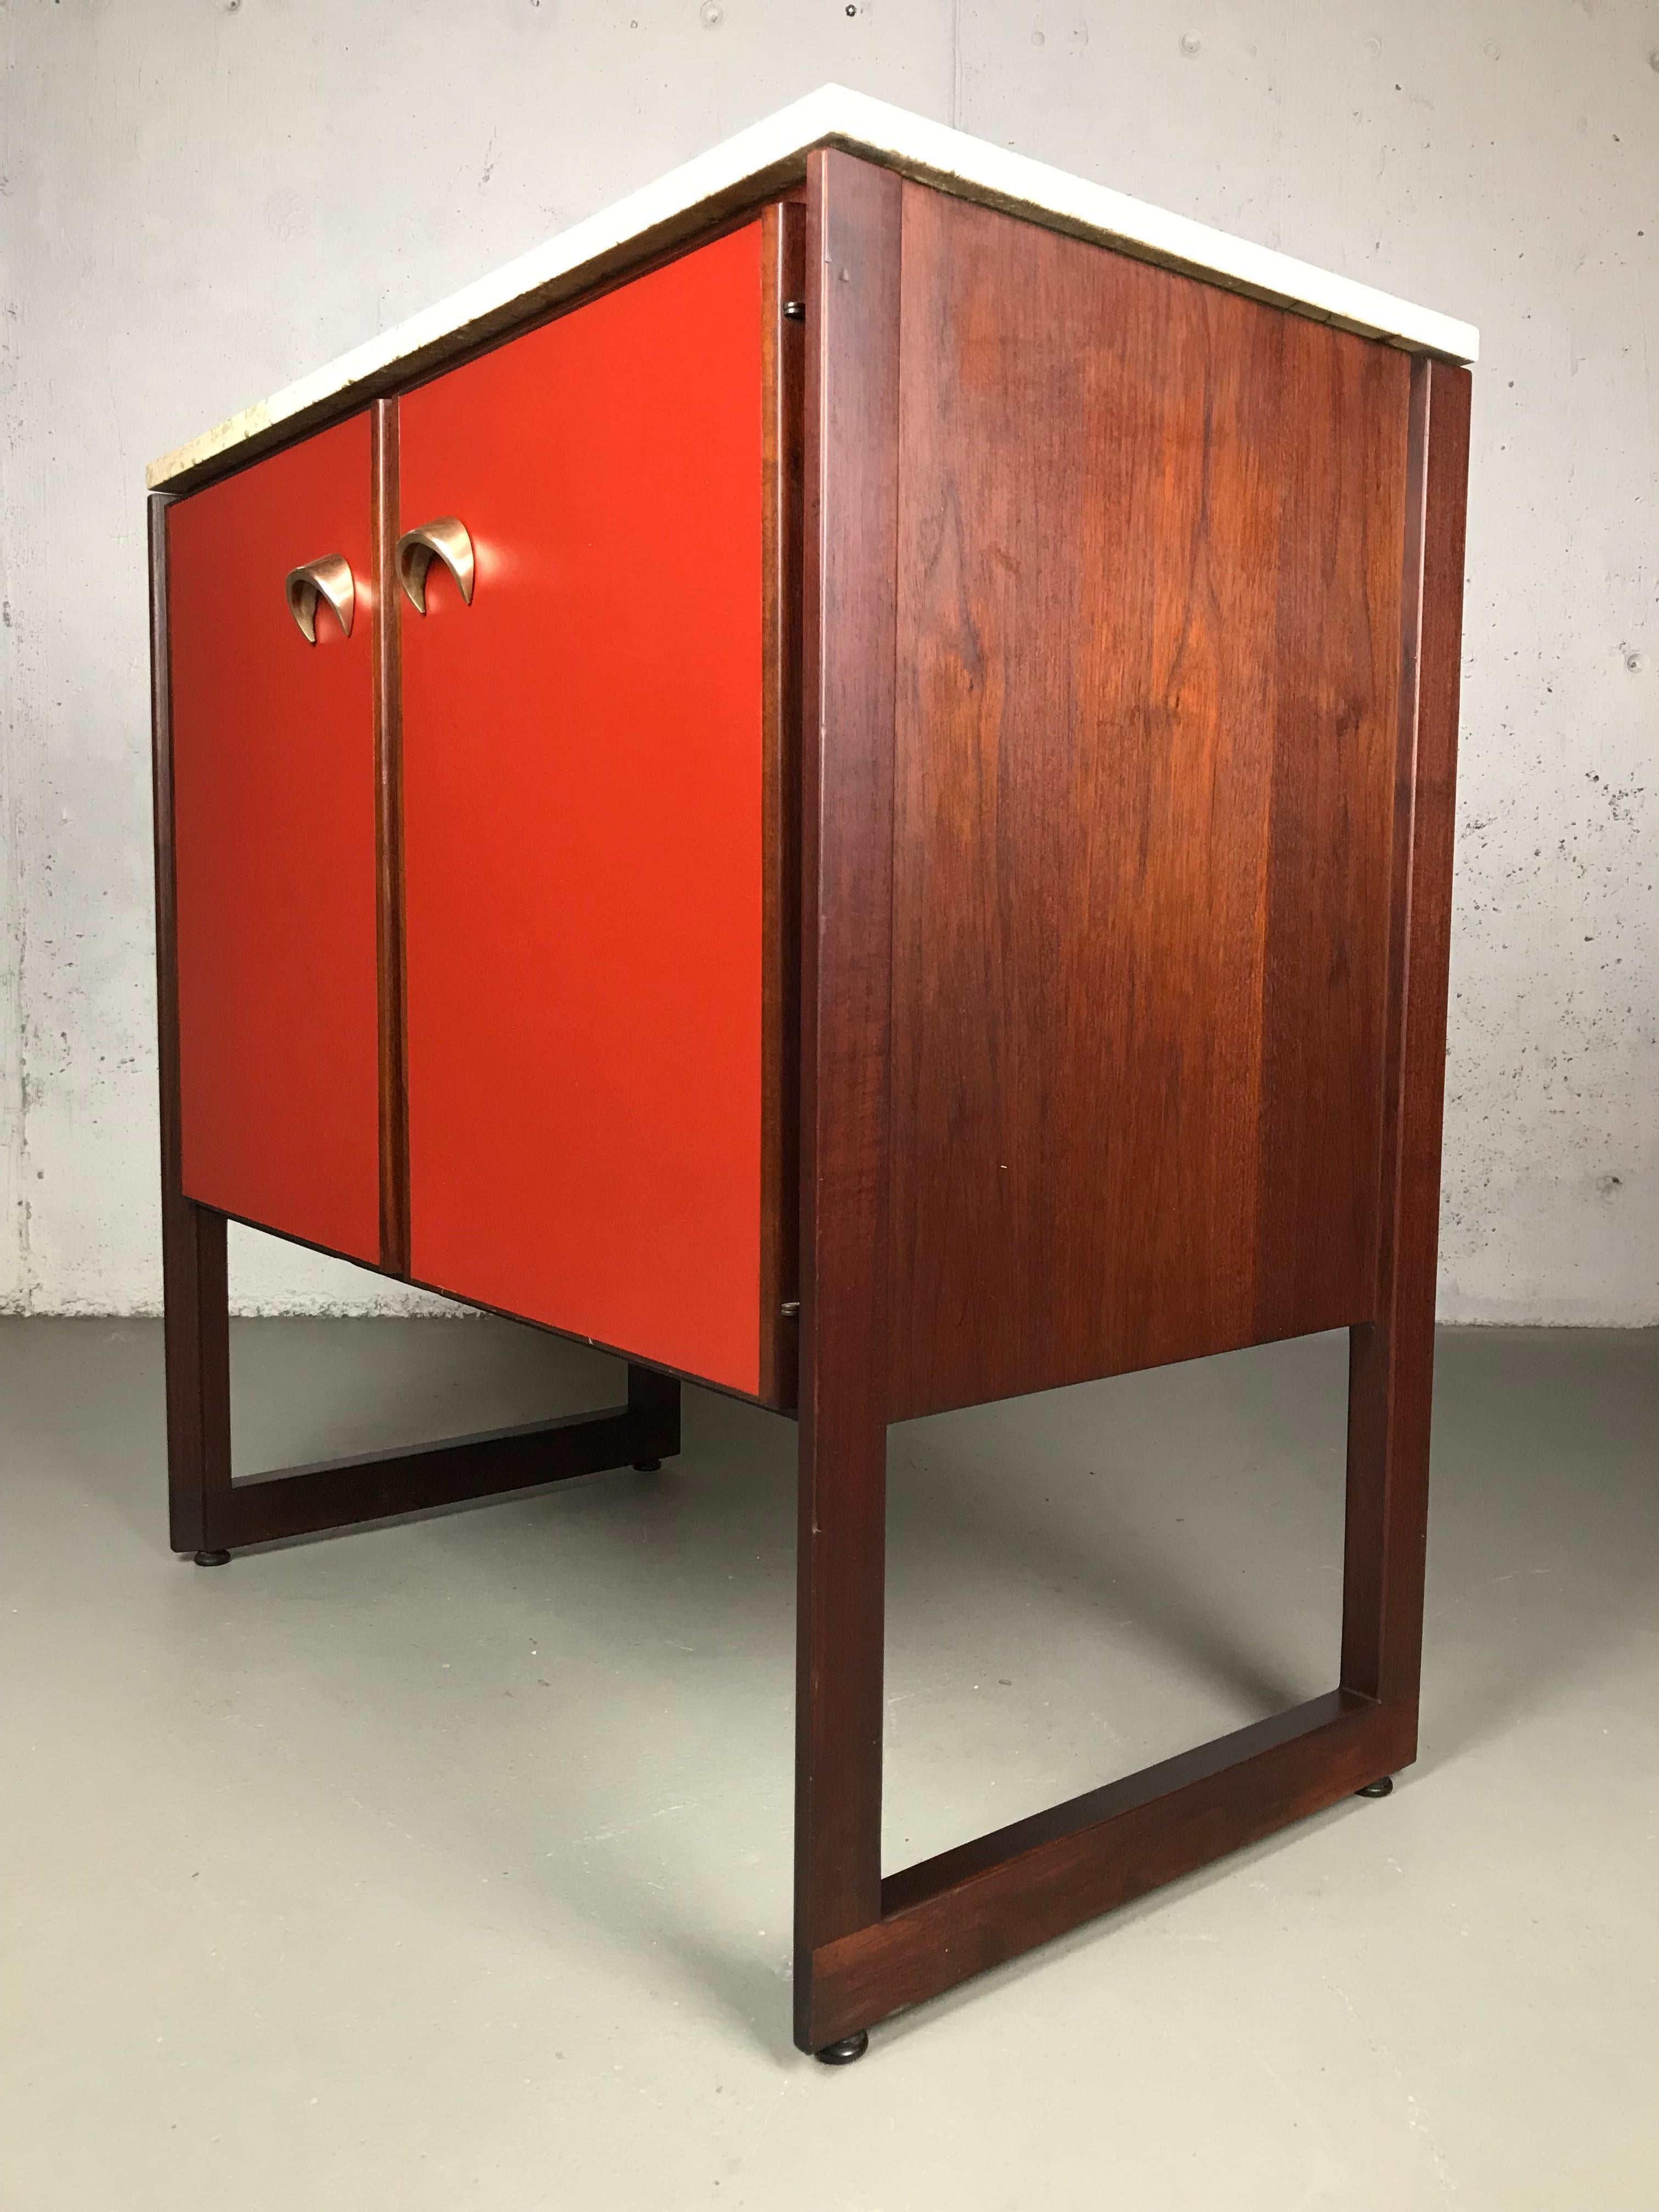 Wonderful example of American Modernism by Jens Risom. This cabinet is made of a wonderful use of contrasting materials: walnut, rosewood, travertine marble, red vinyl and brass. Rosewood is used in the trim around the doors, framing pieces and